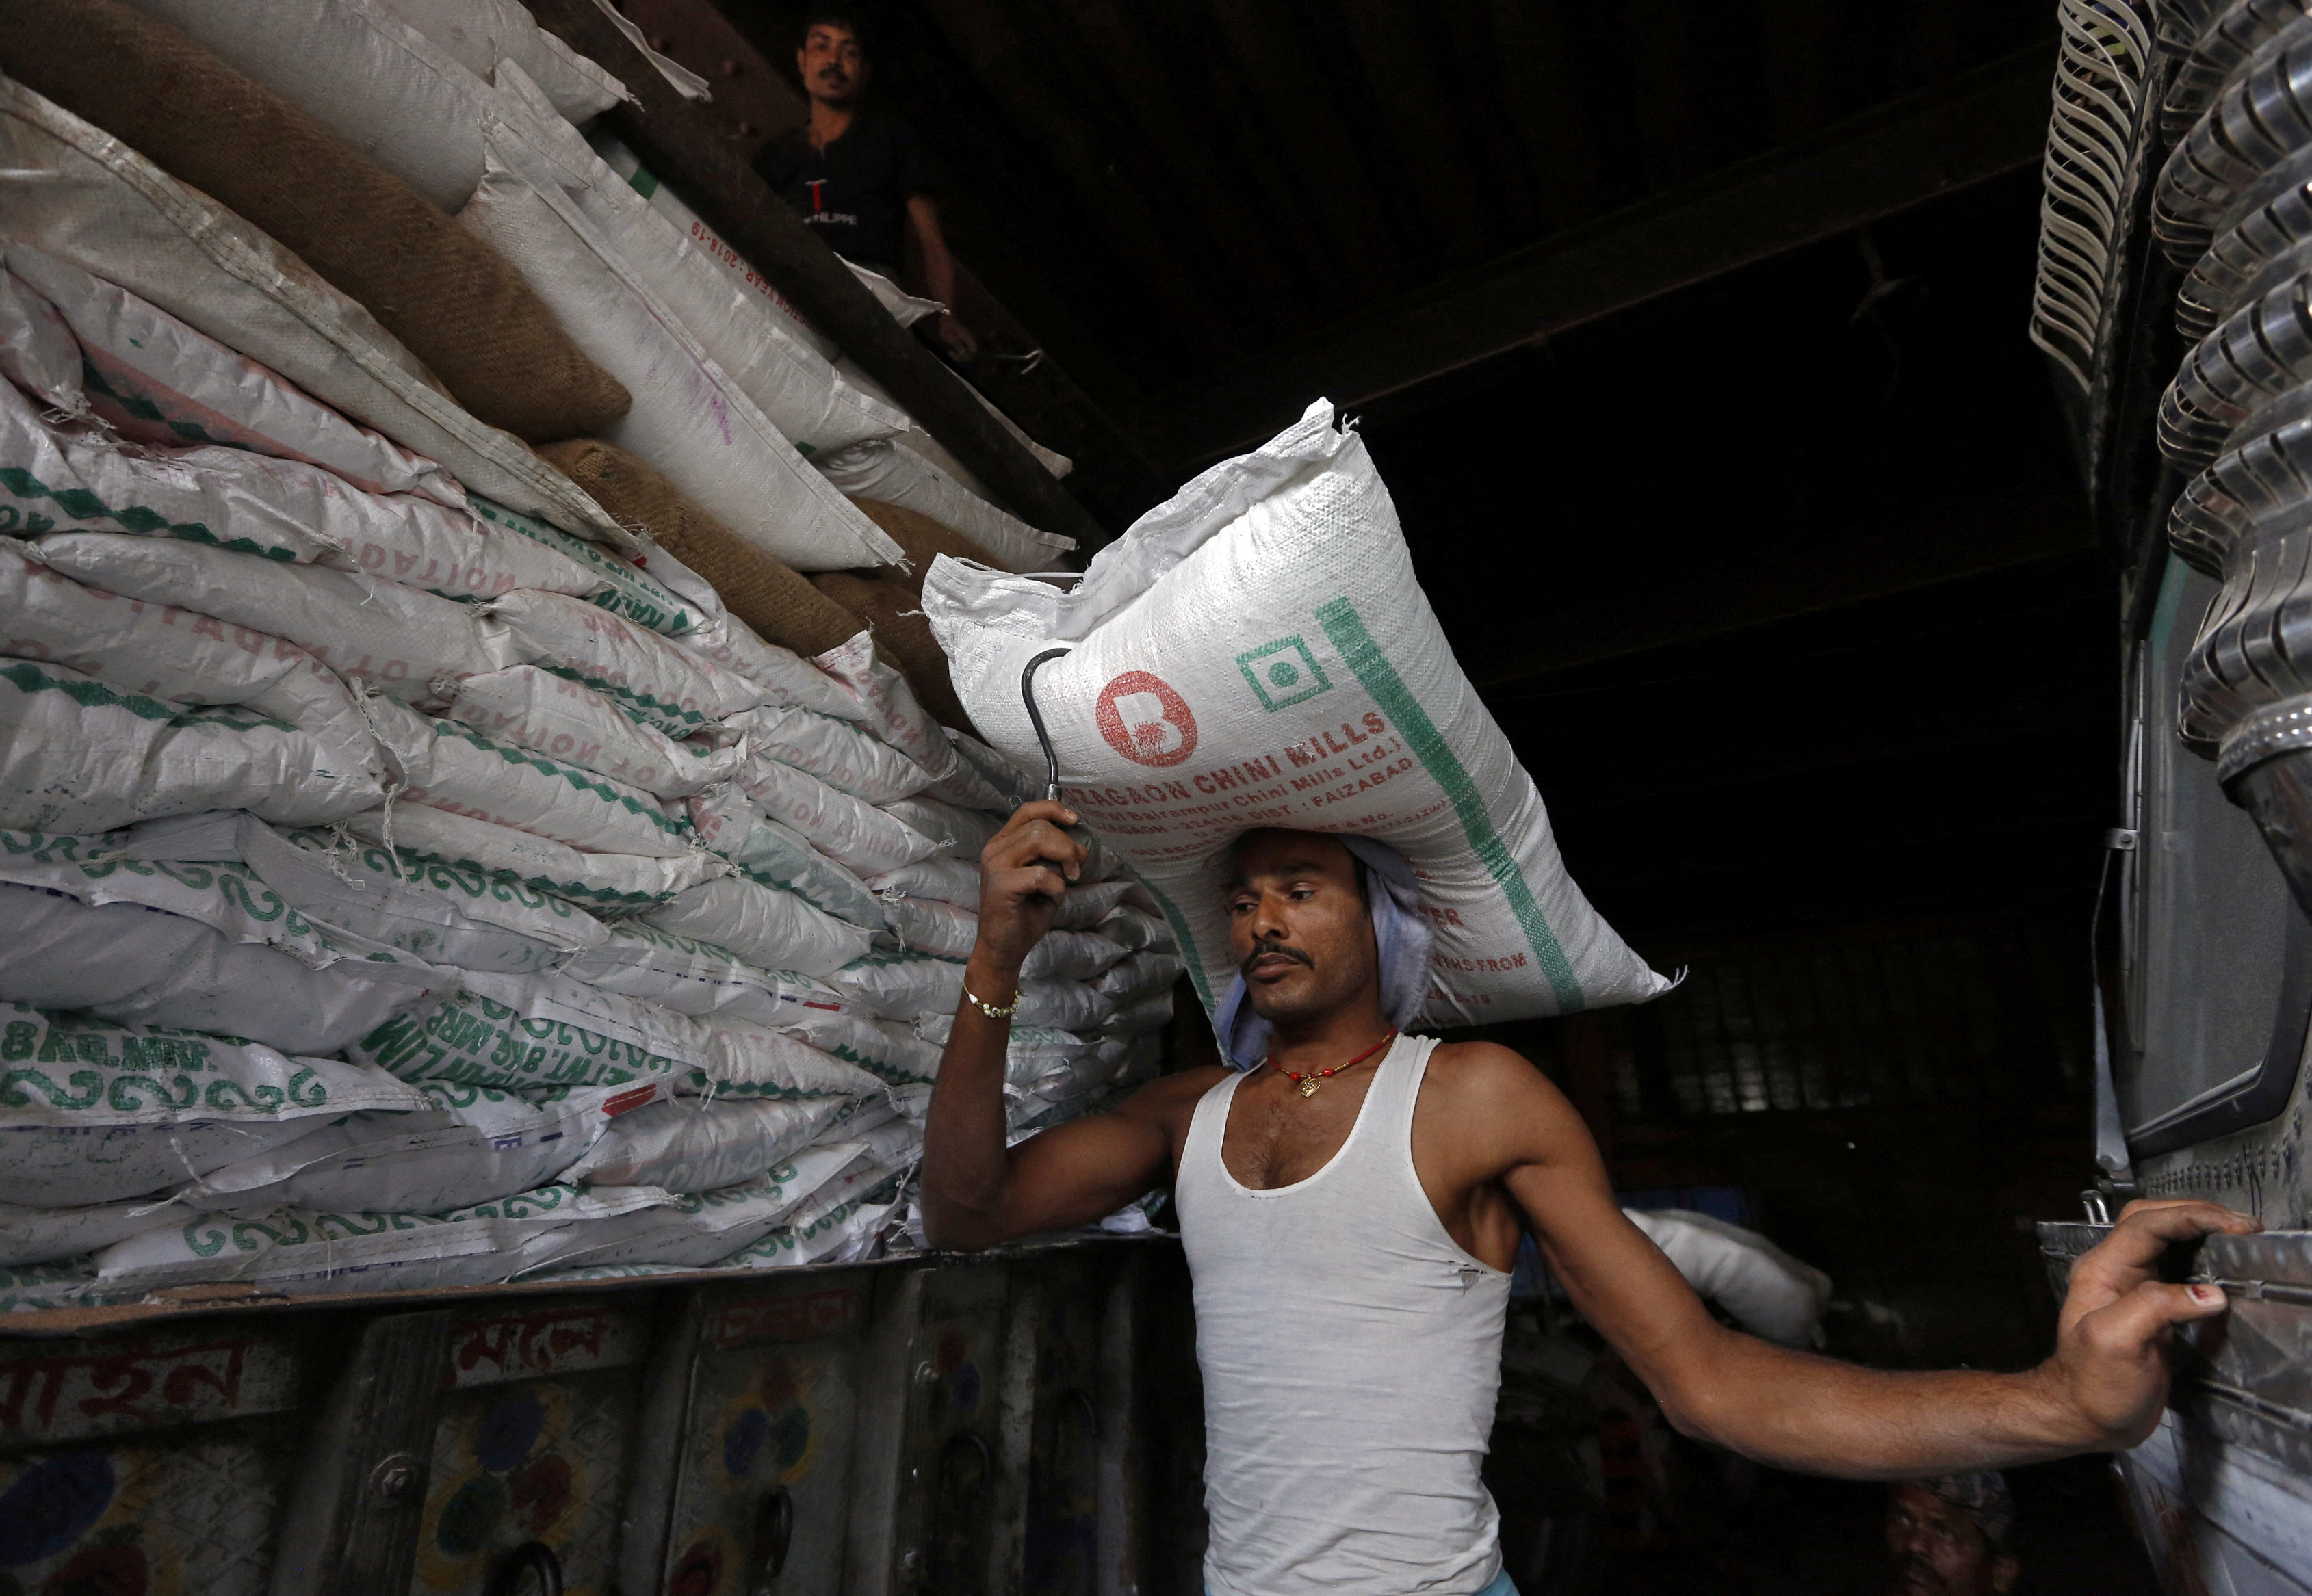 A labourer carries a sack of sugar to load it onto a supply truck in Kolkata, India